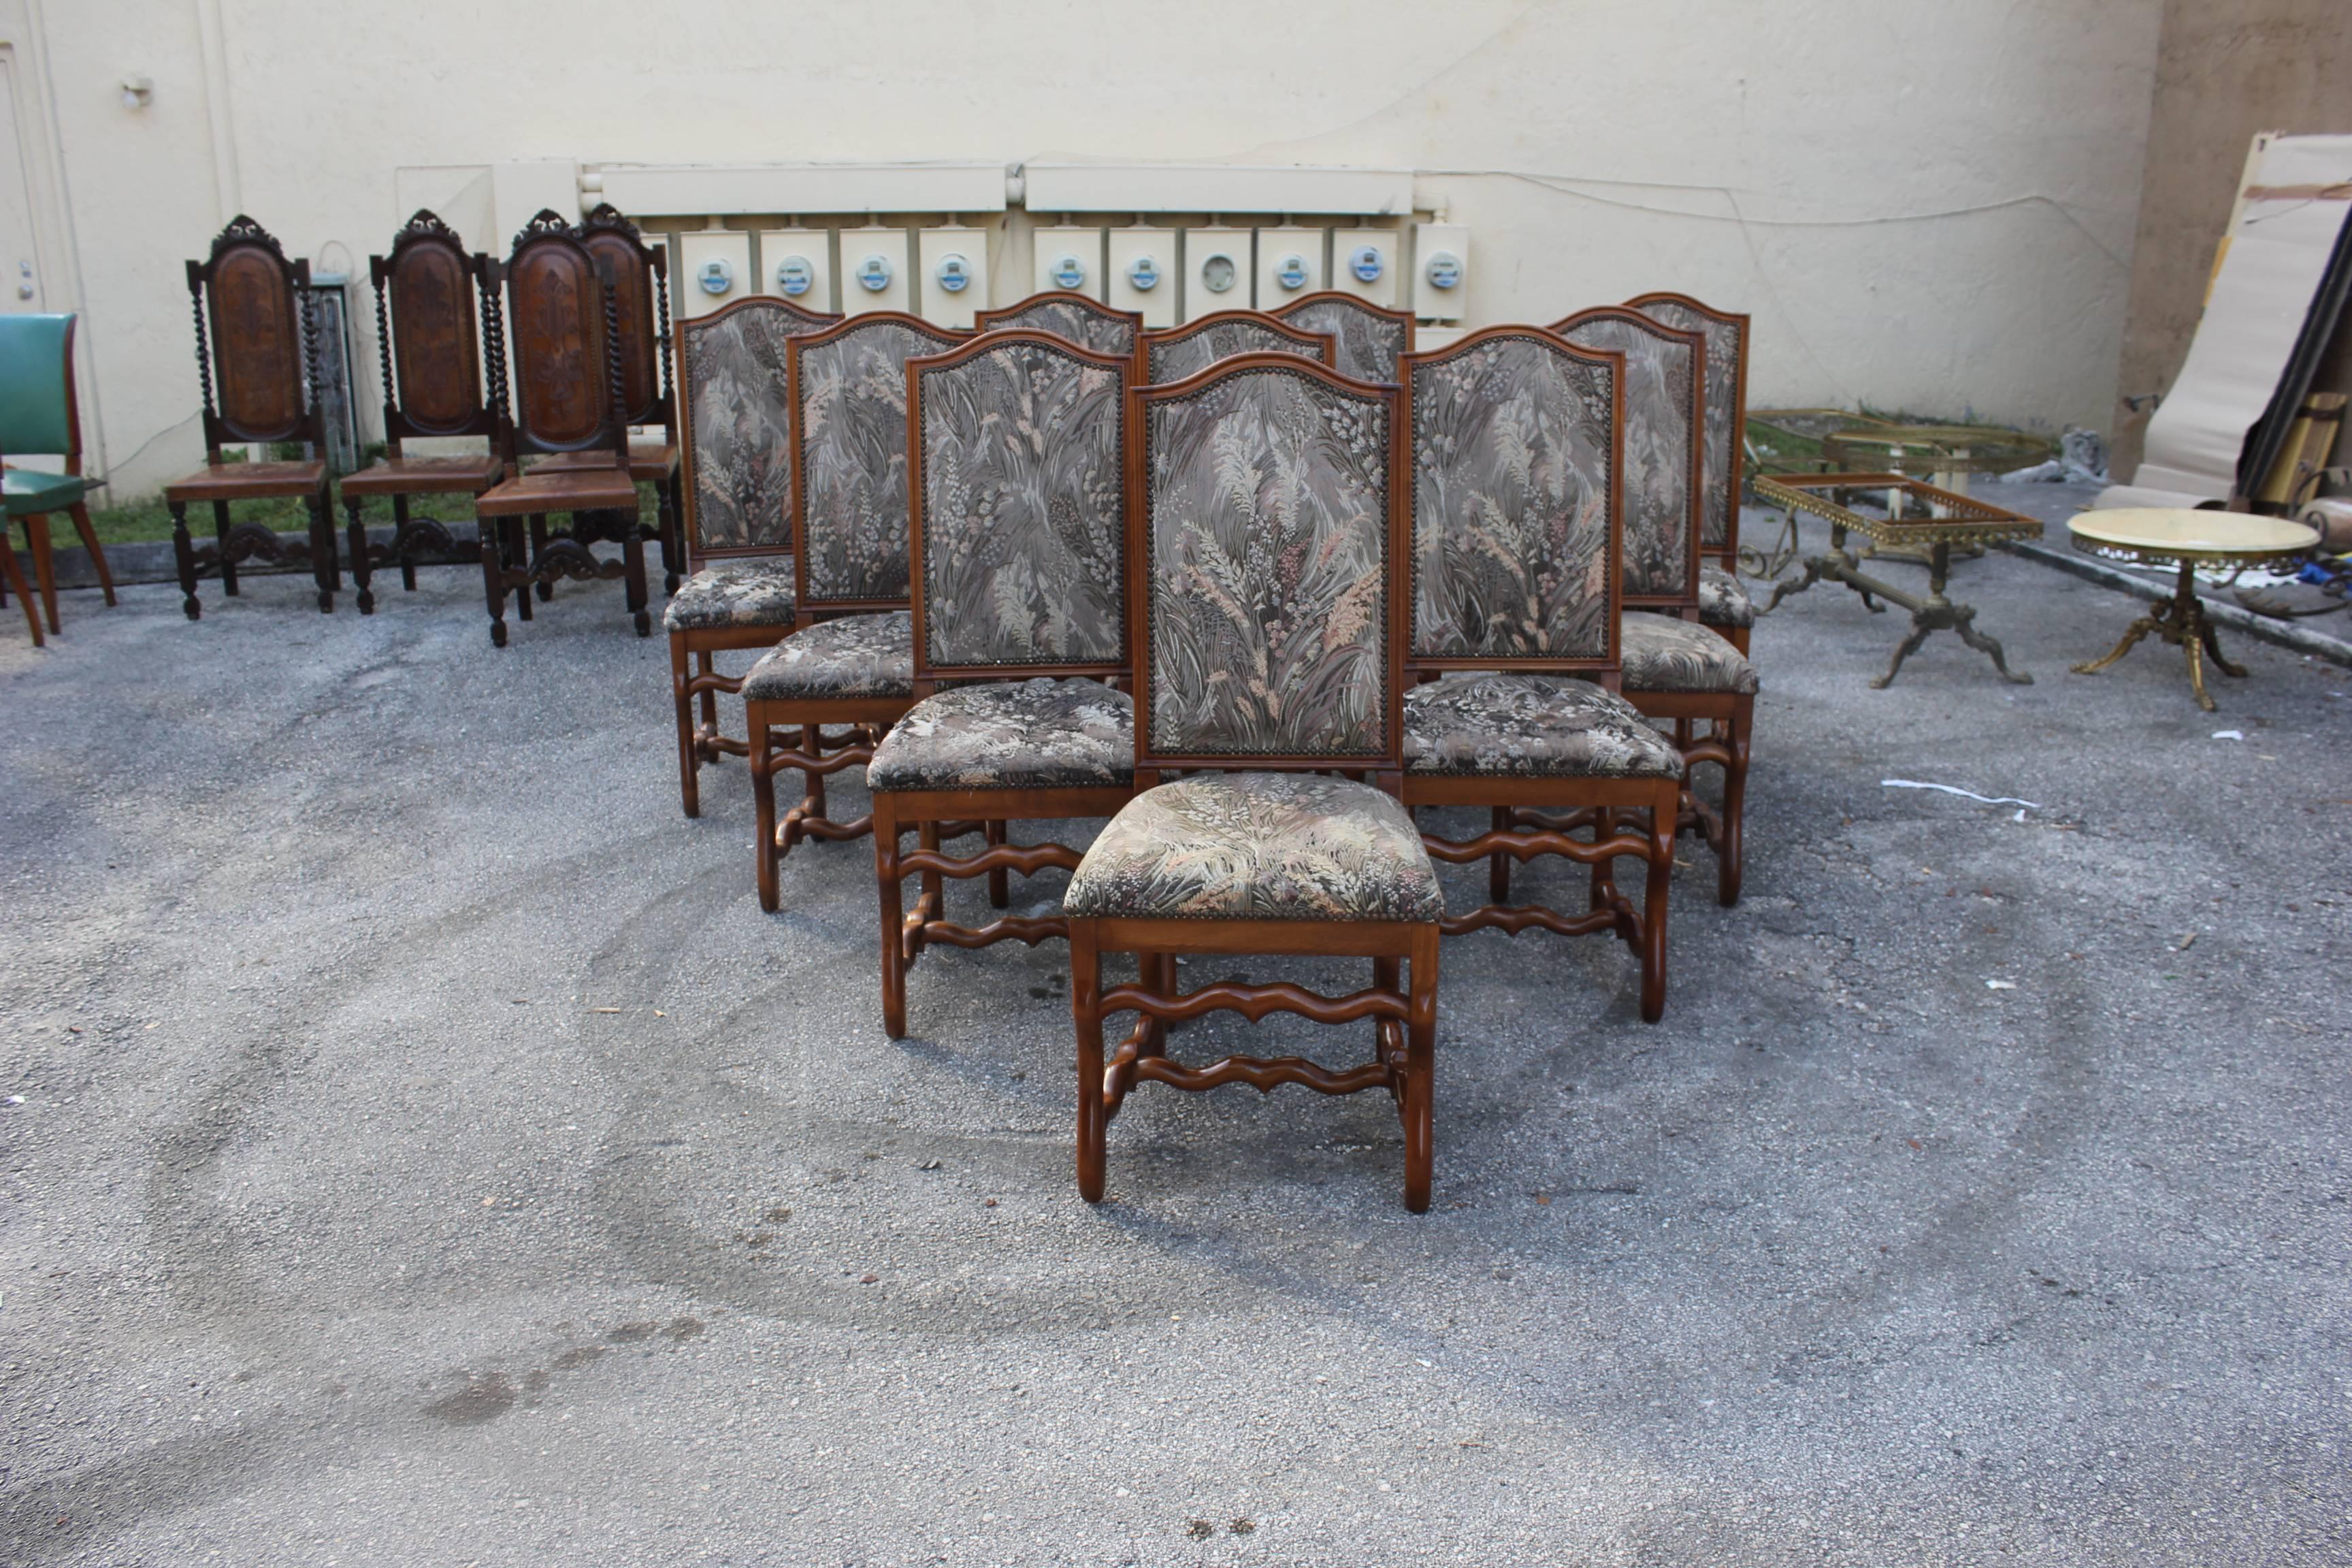 Monumental set of ten Louis XIII style Os de Mouton dining chairs with chapeau de gendarme backs, circa 1880s. Vintage fabric upholstery with nailheads, solid walnut chair frames are in excellent condition. From South France Bordeaux. ( fabric